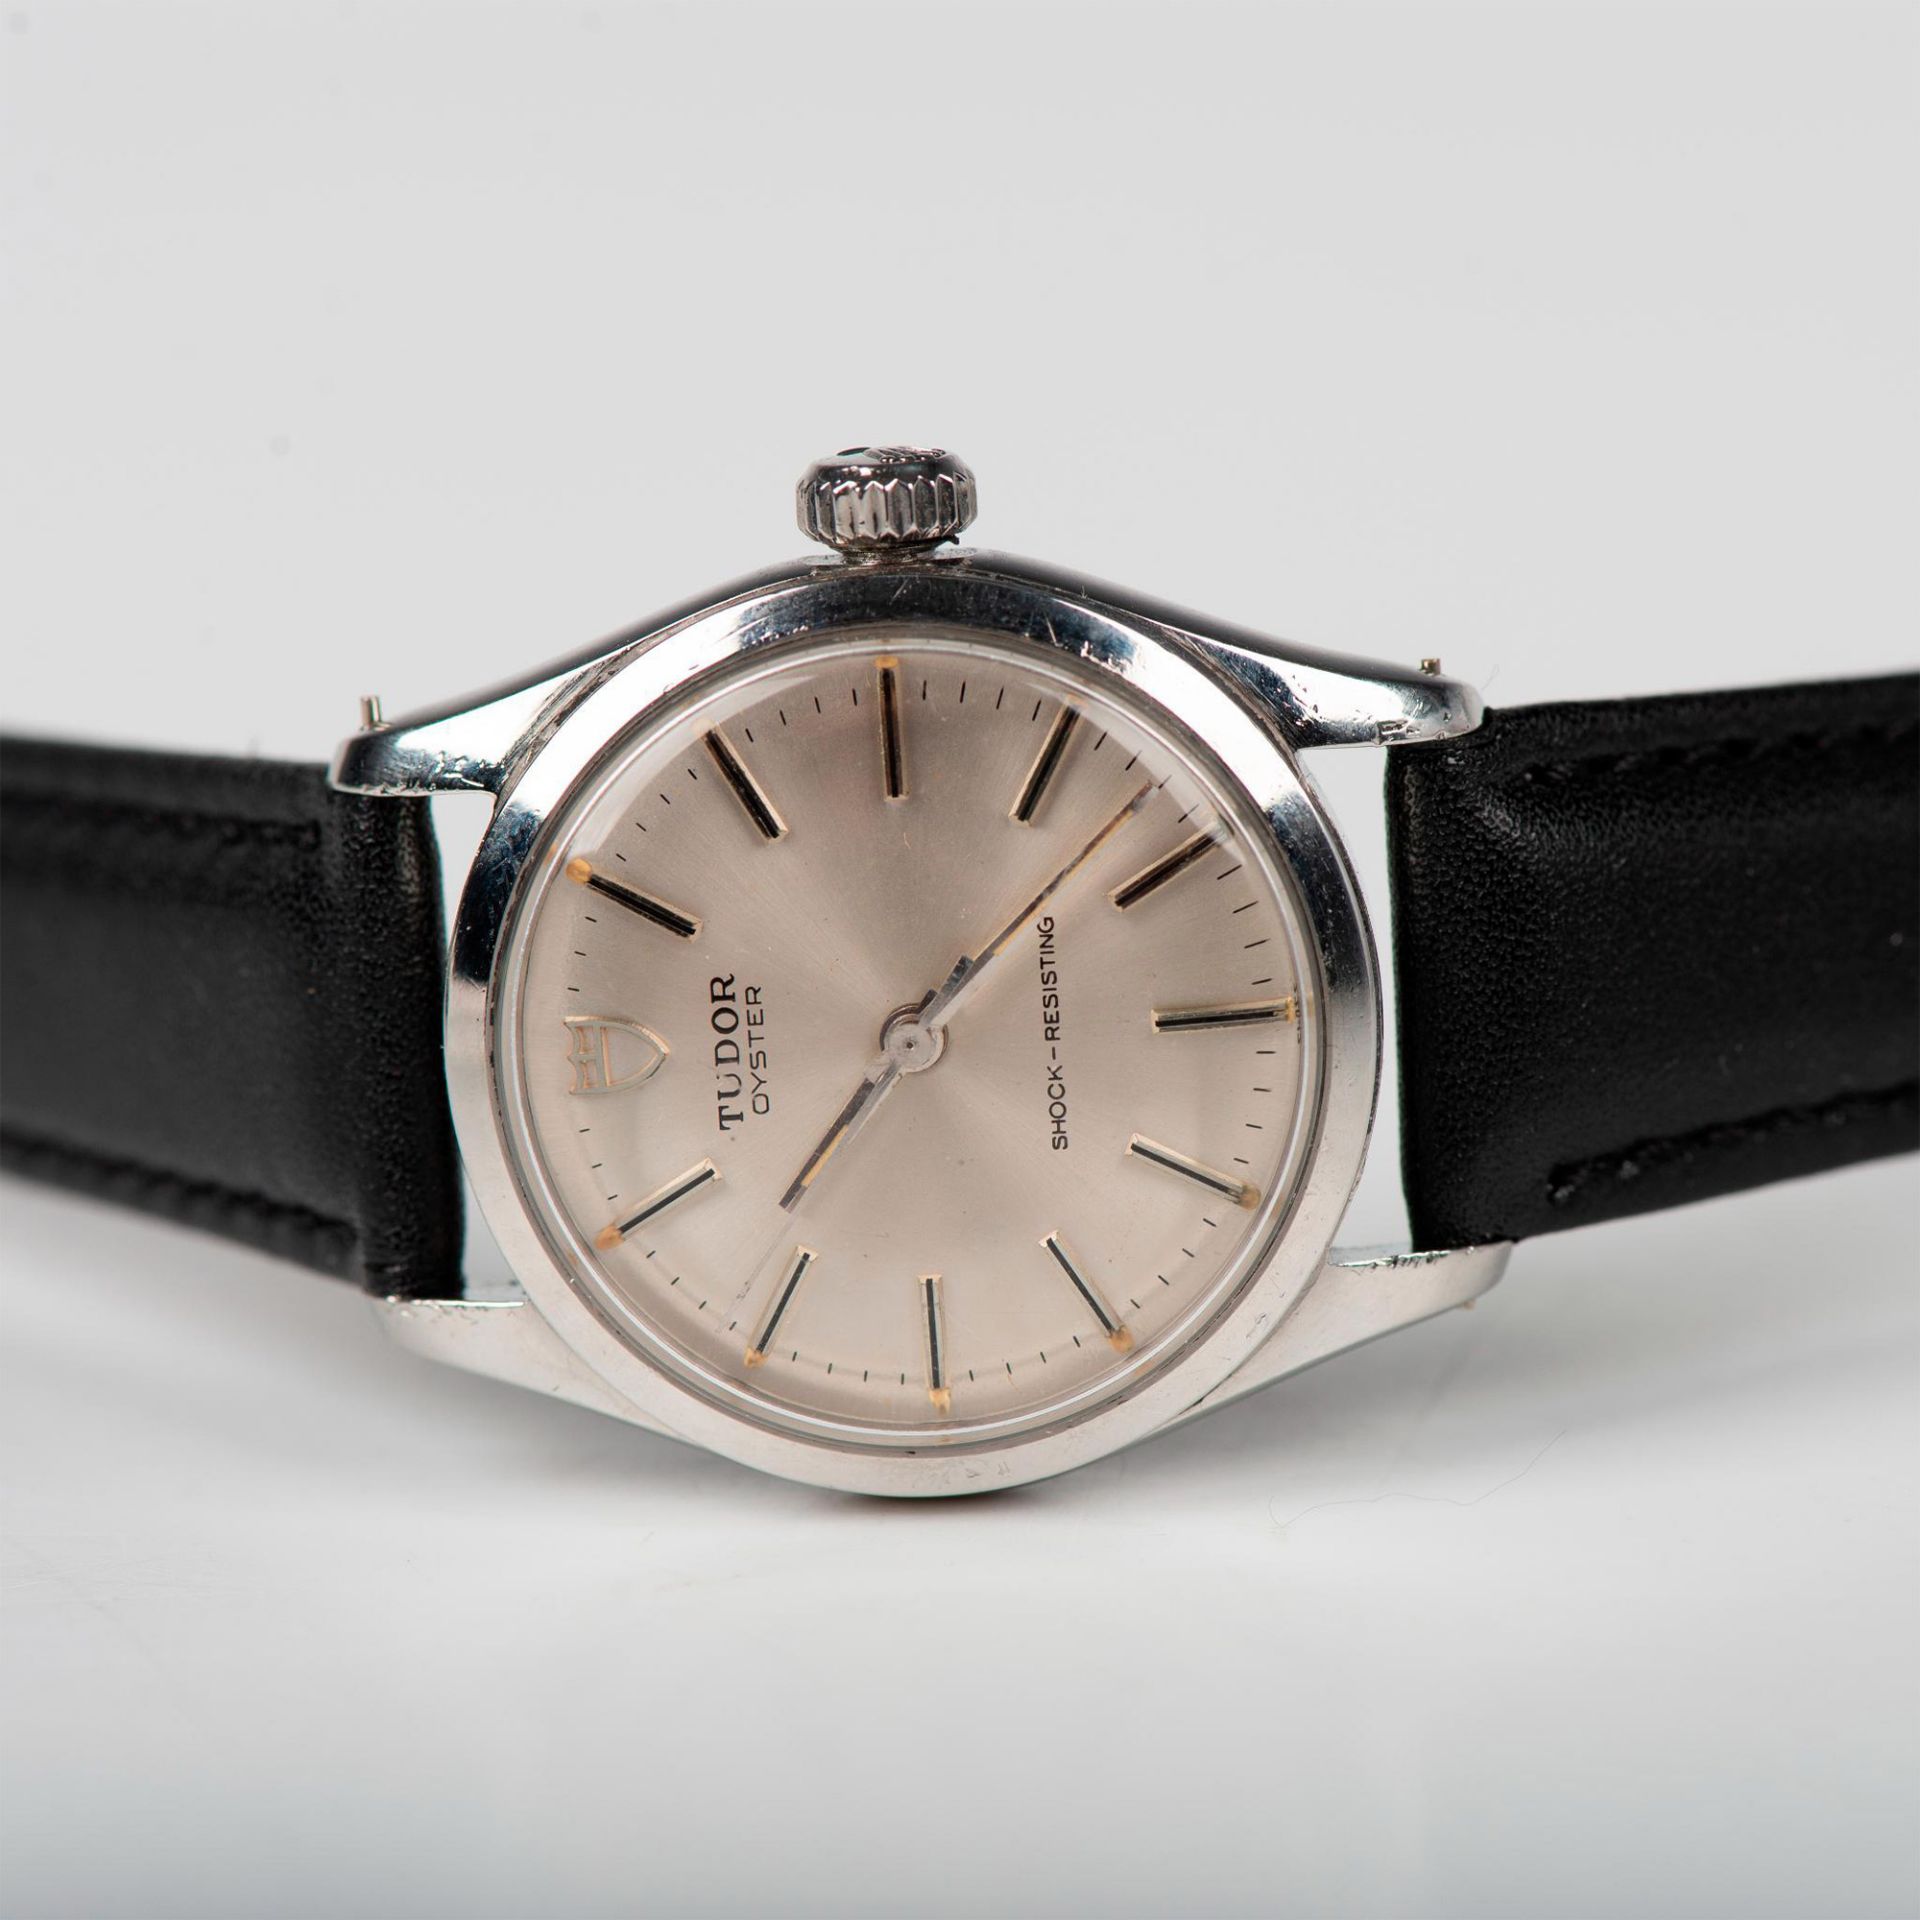 Vintage 1950s Tudor Oyster Manual Watch, 7903 - Image 3 of 10